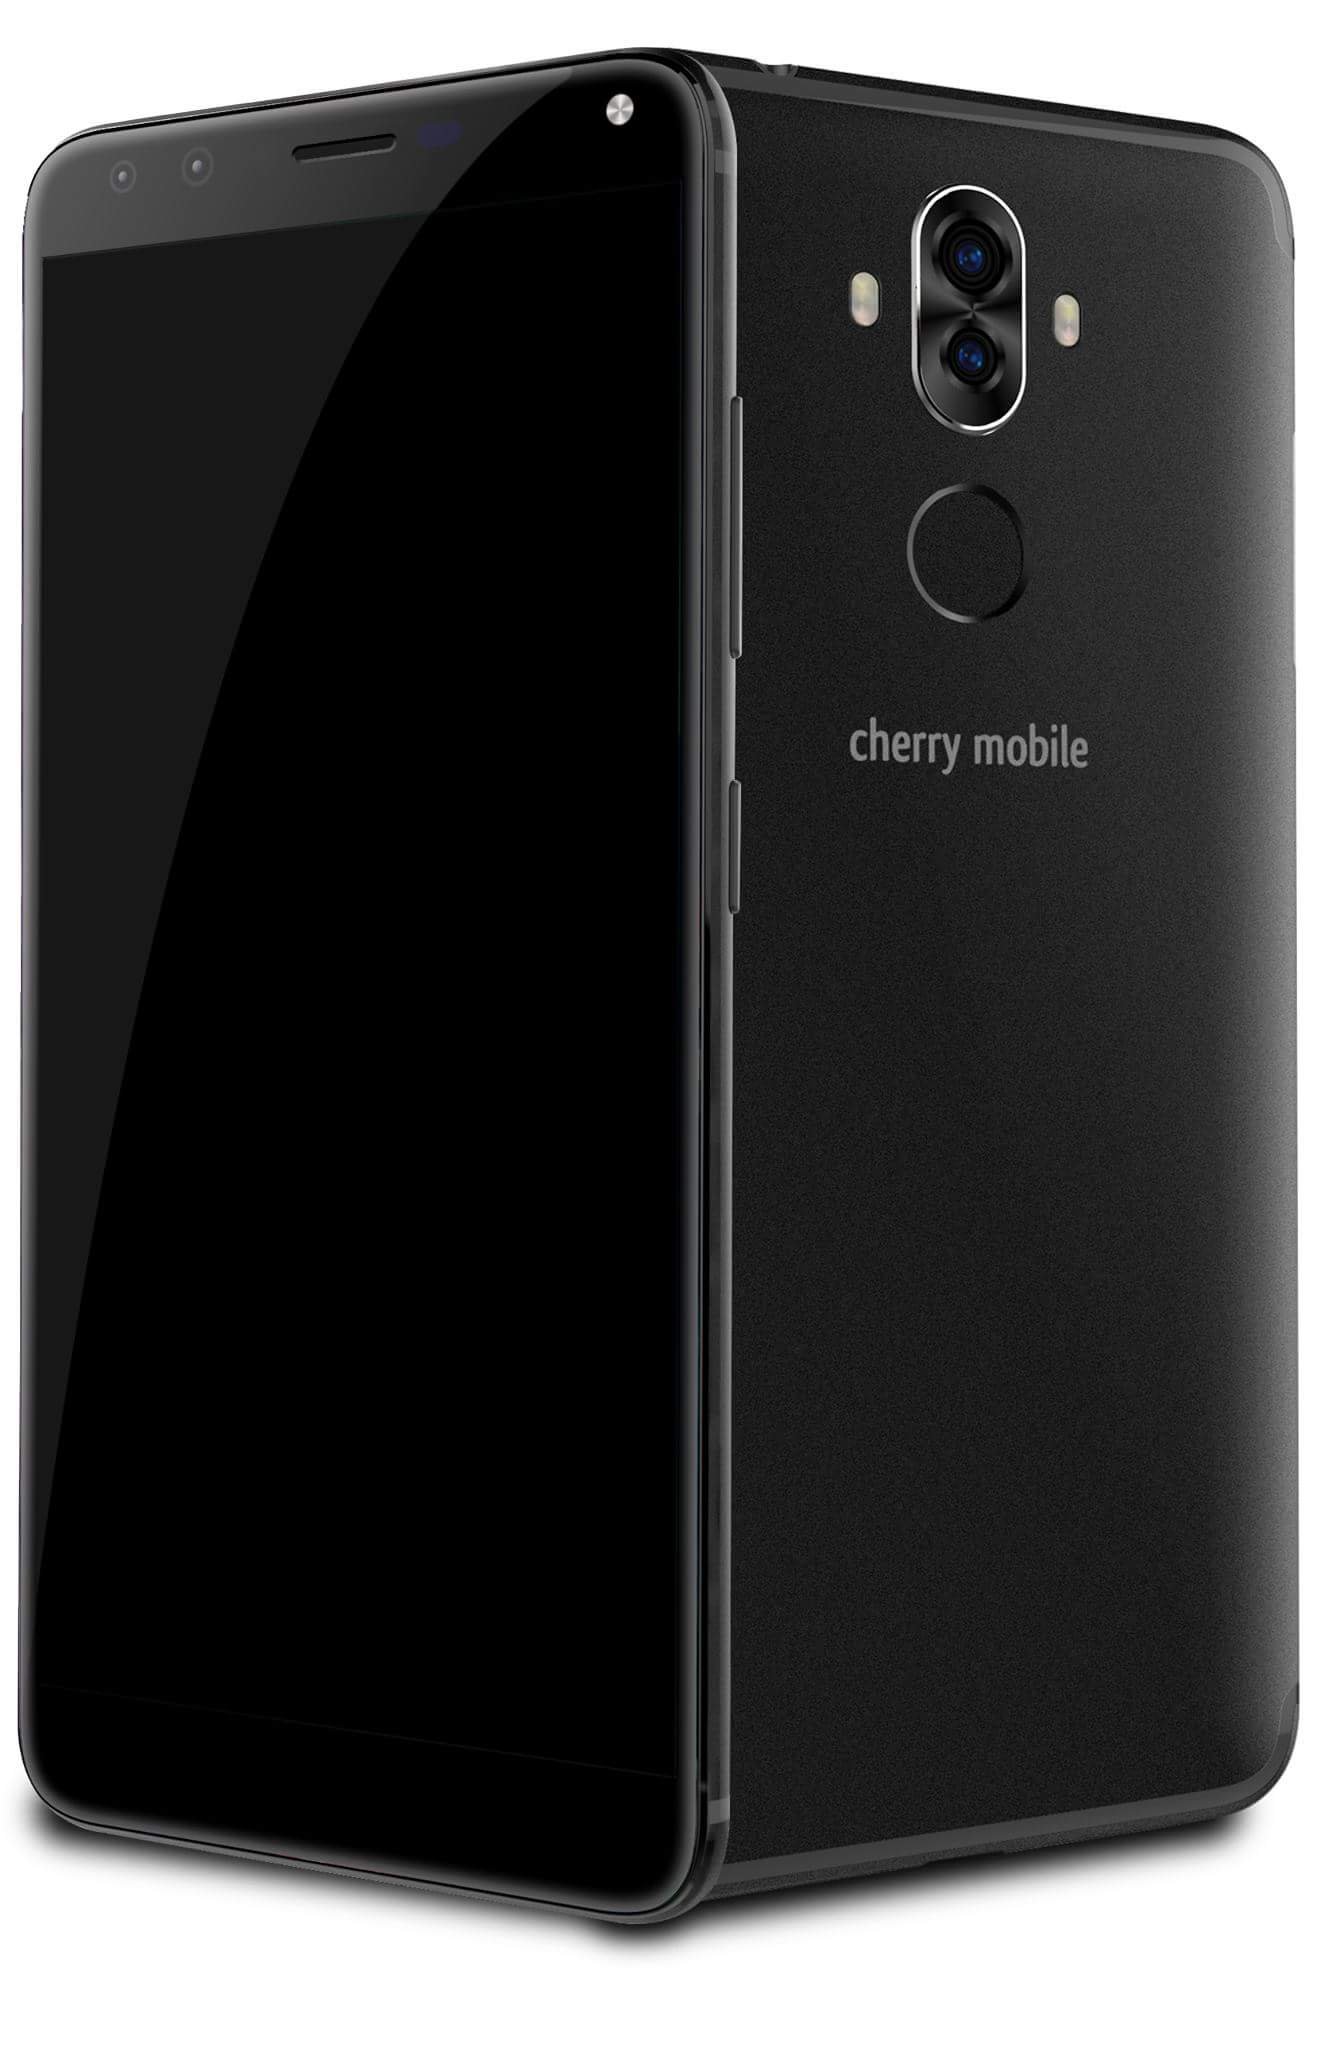 Cherry Mobile Flare S6 and S6 Plus to be Launched this October